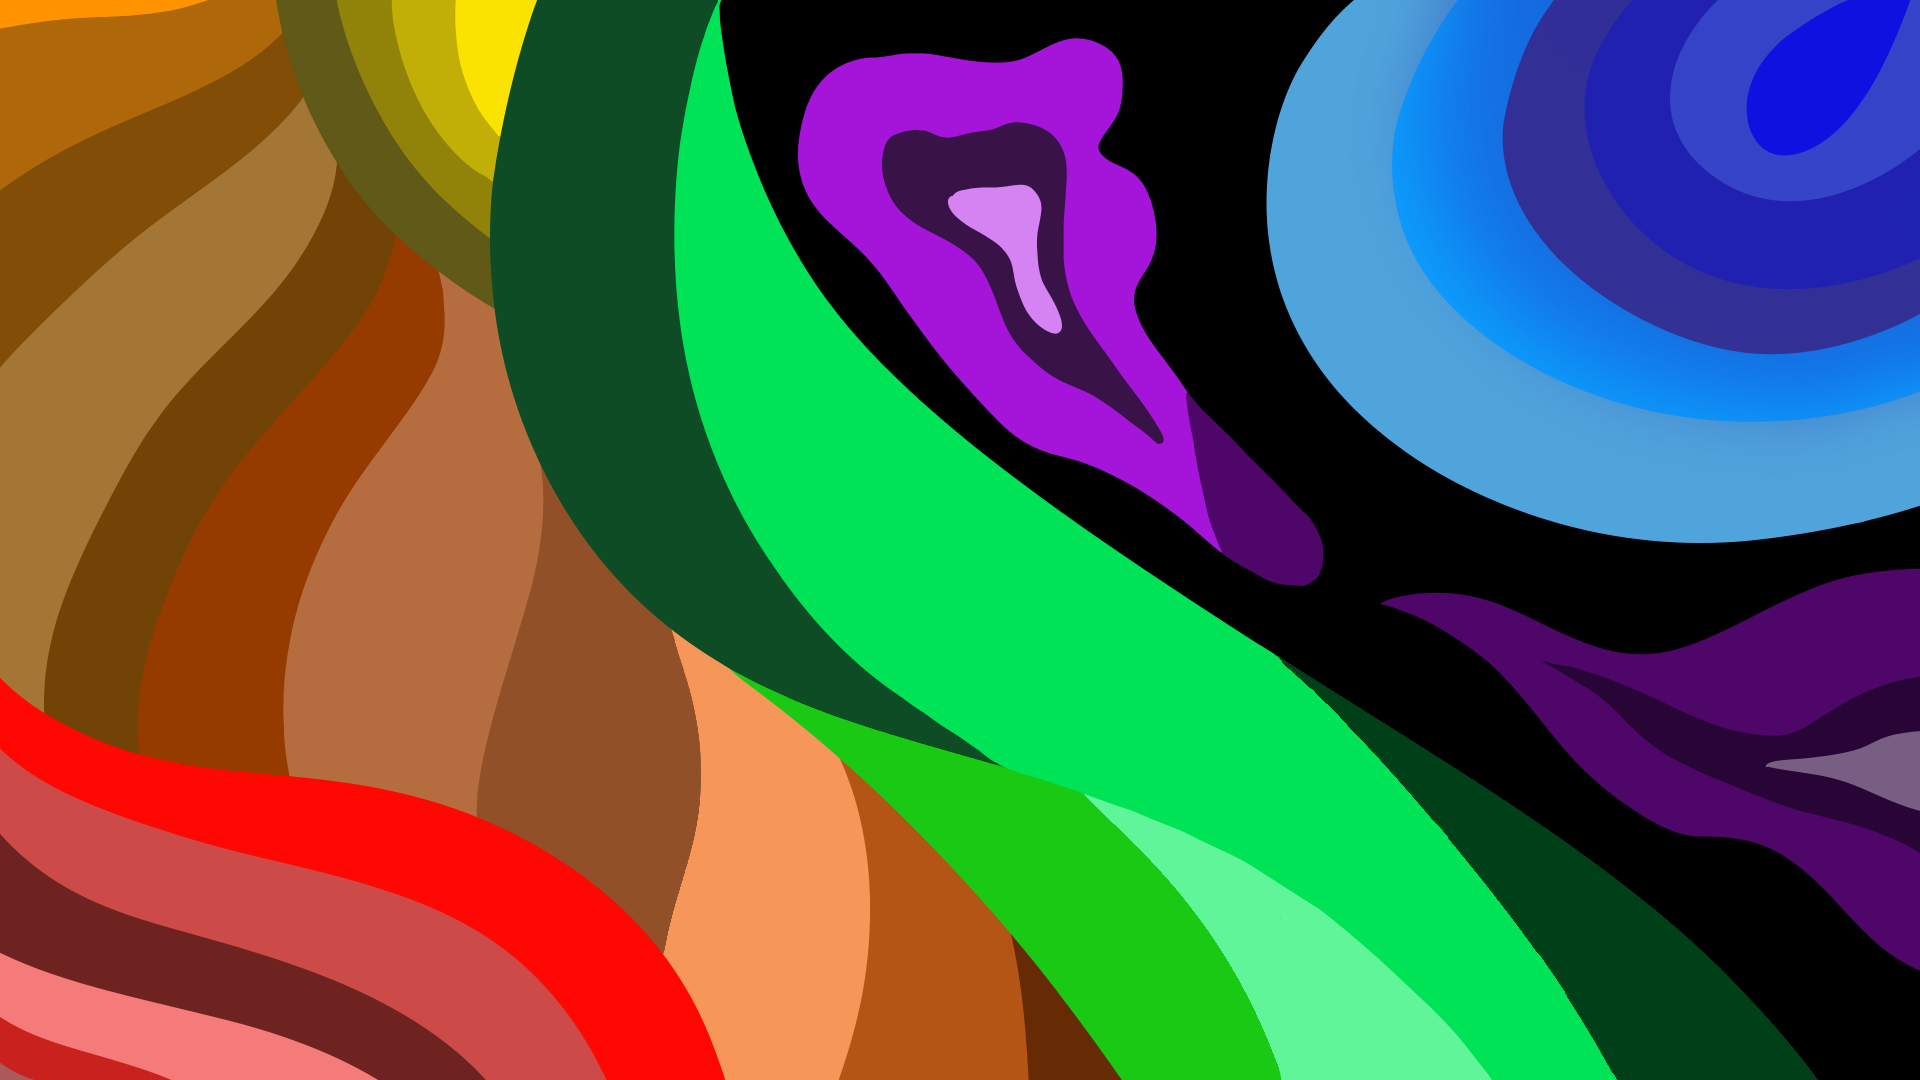 General 1920x1080 digital art abstract colorful